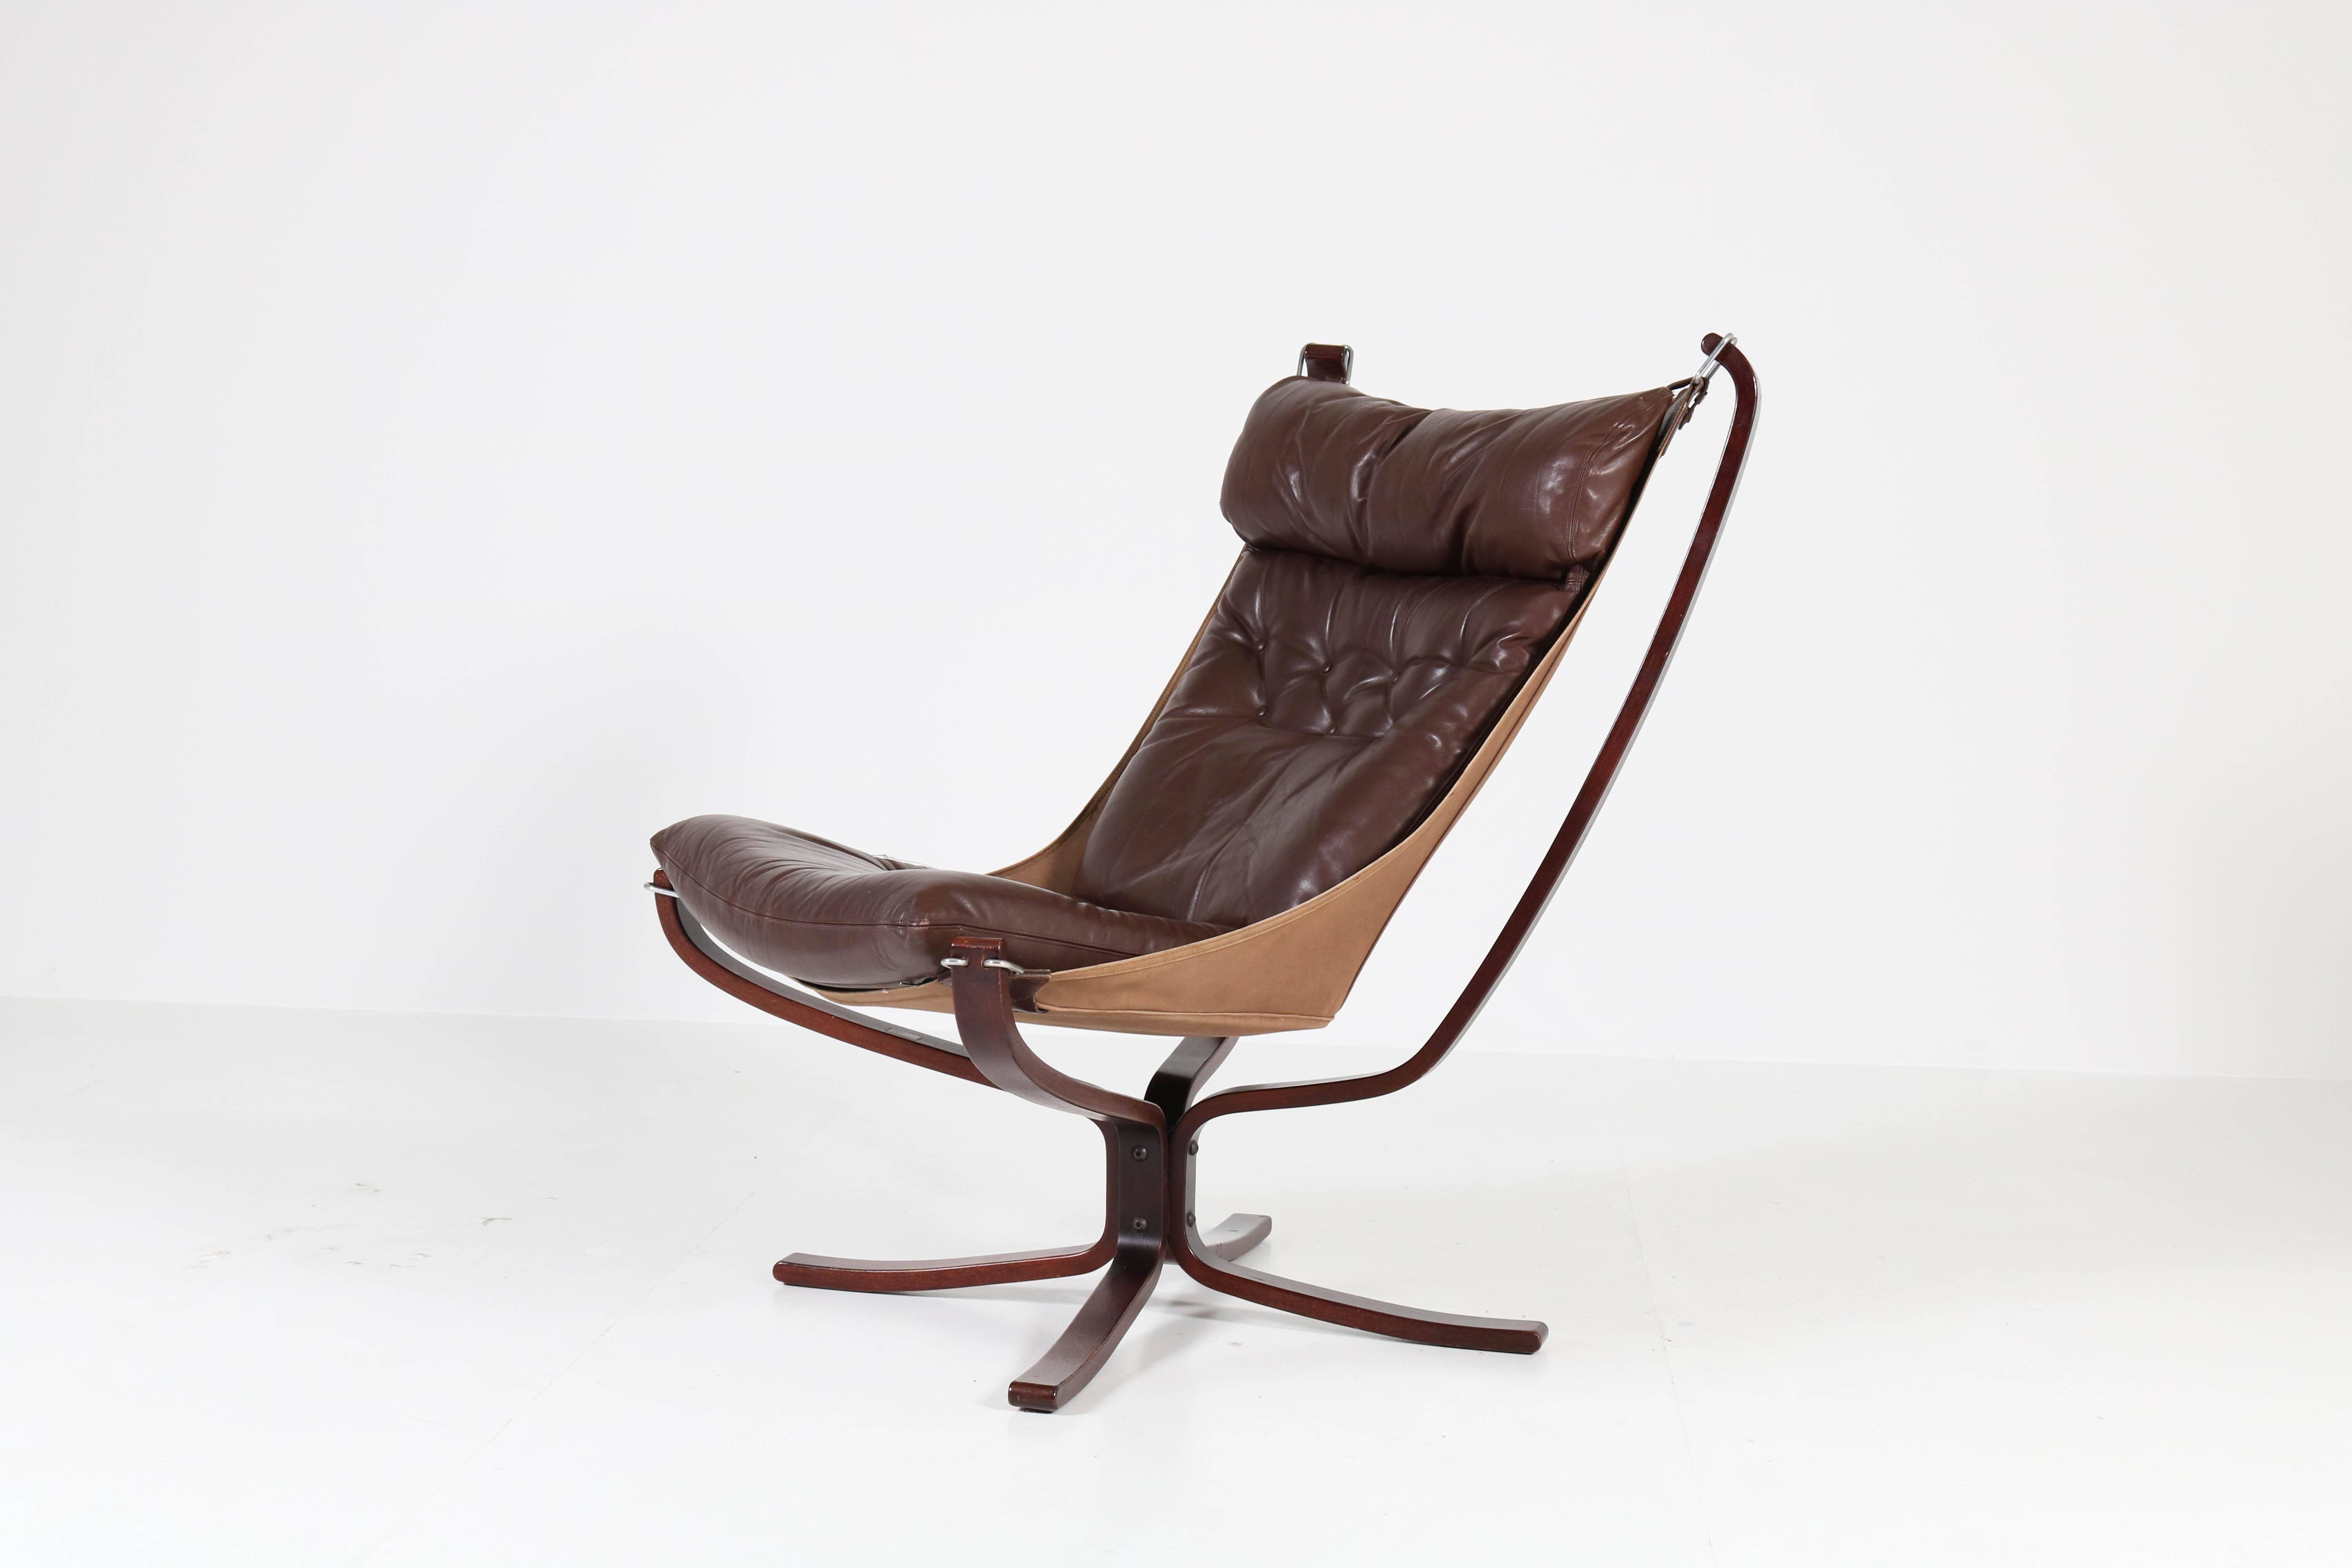 Elegant Mid-Century Modern lounge chair.
Design by Sigurd Ressell for Vatne Møbler Norway.
Iconic Norwegian design from the seventies.
Marked with original label.
Original brown leather cushion which is in excellent condition and still soft and